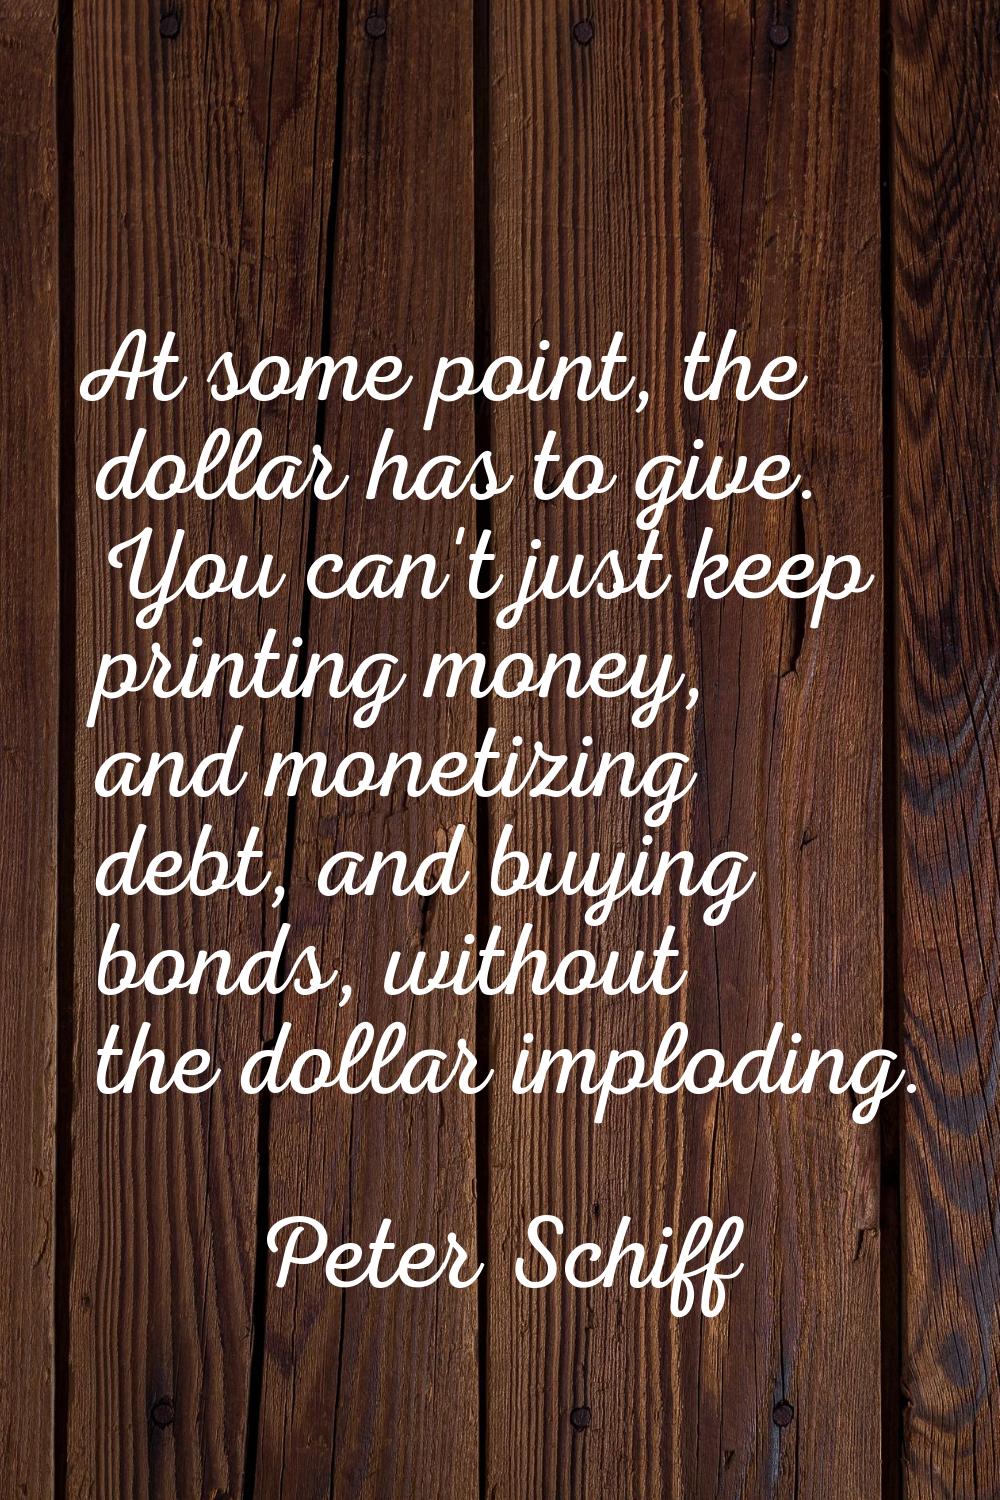 At some point, the dollar has to give. You can't just keep printing money, and monetizing debt, and